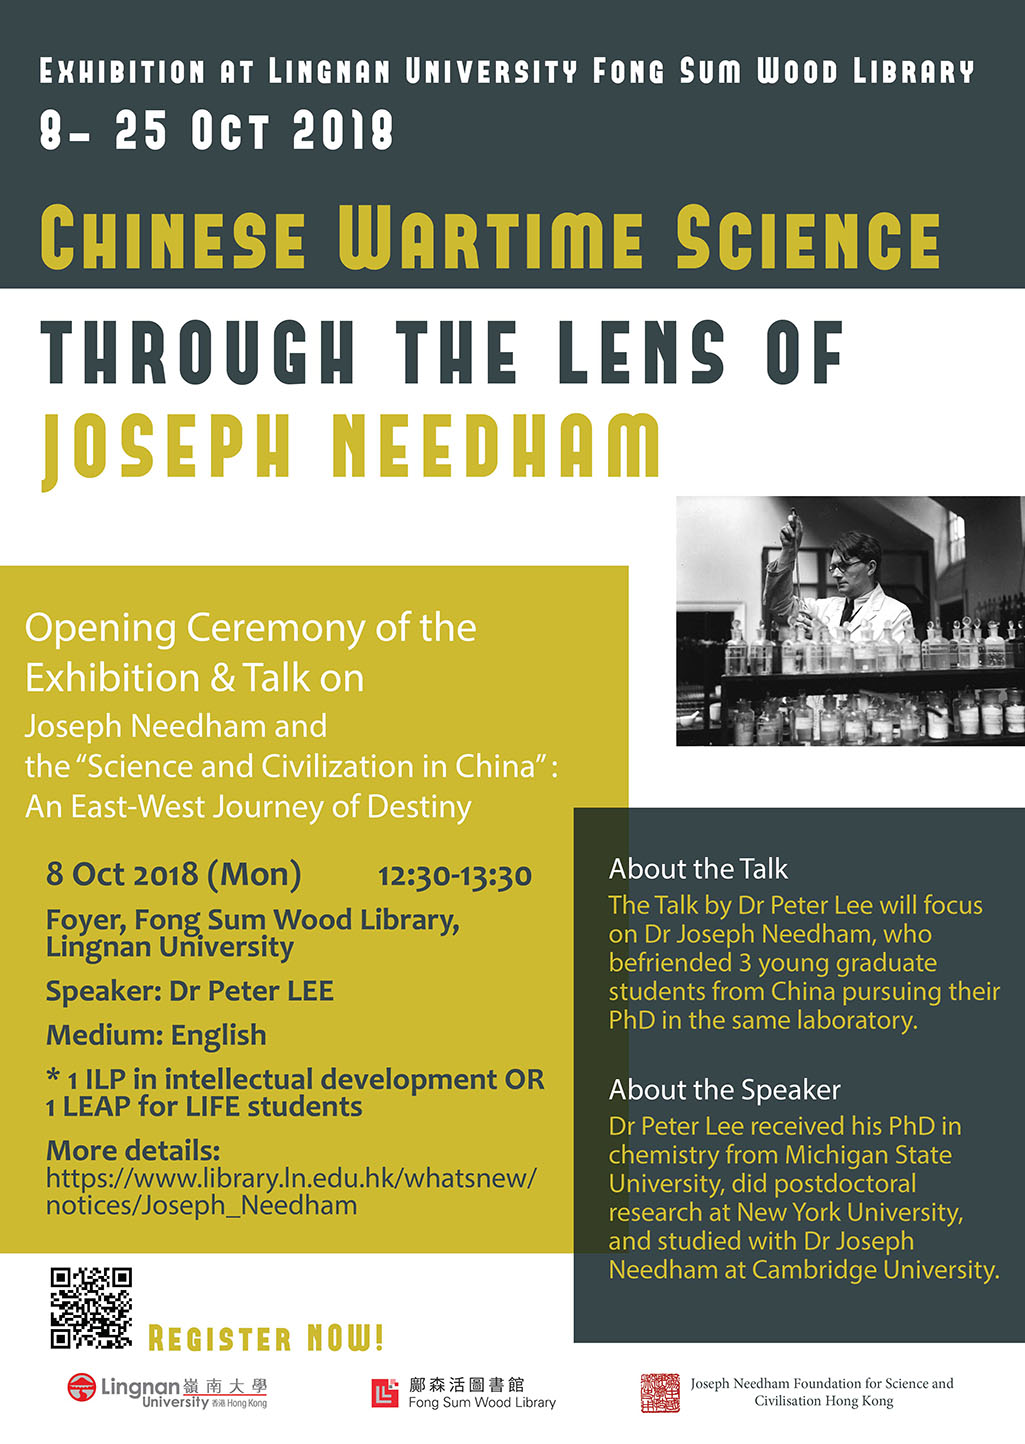 Chinese Wartime Science through the Lens of Joseph Needham Exhibition